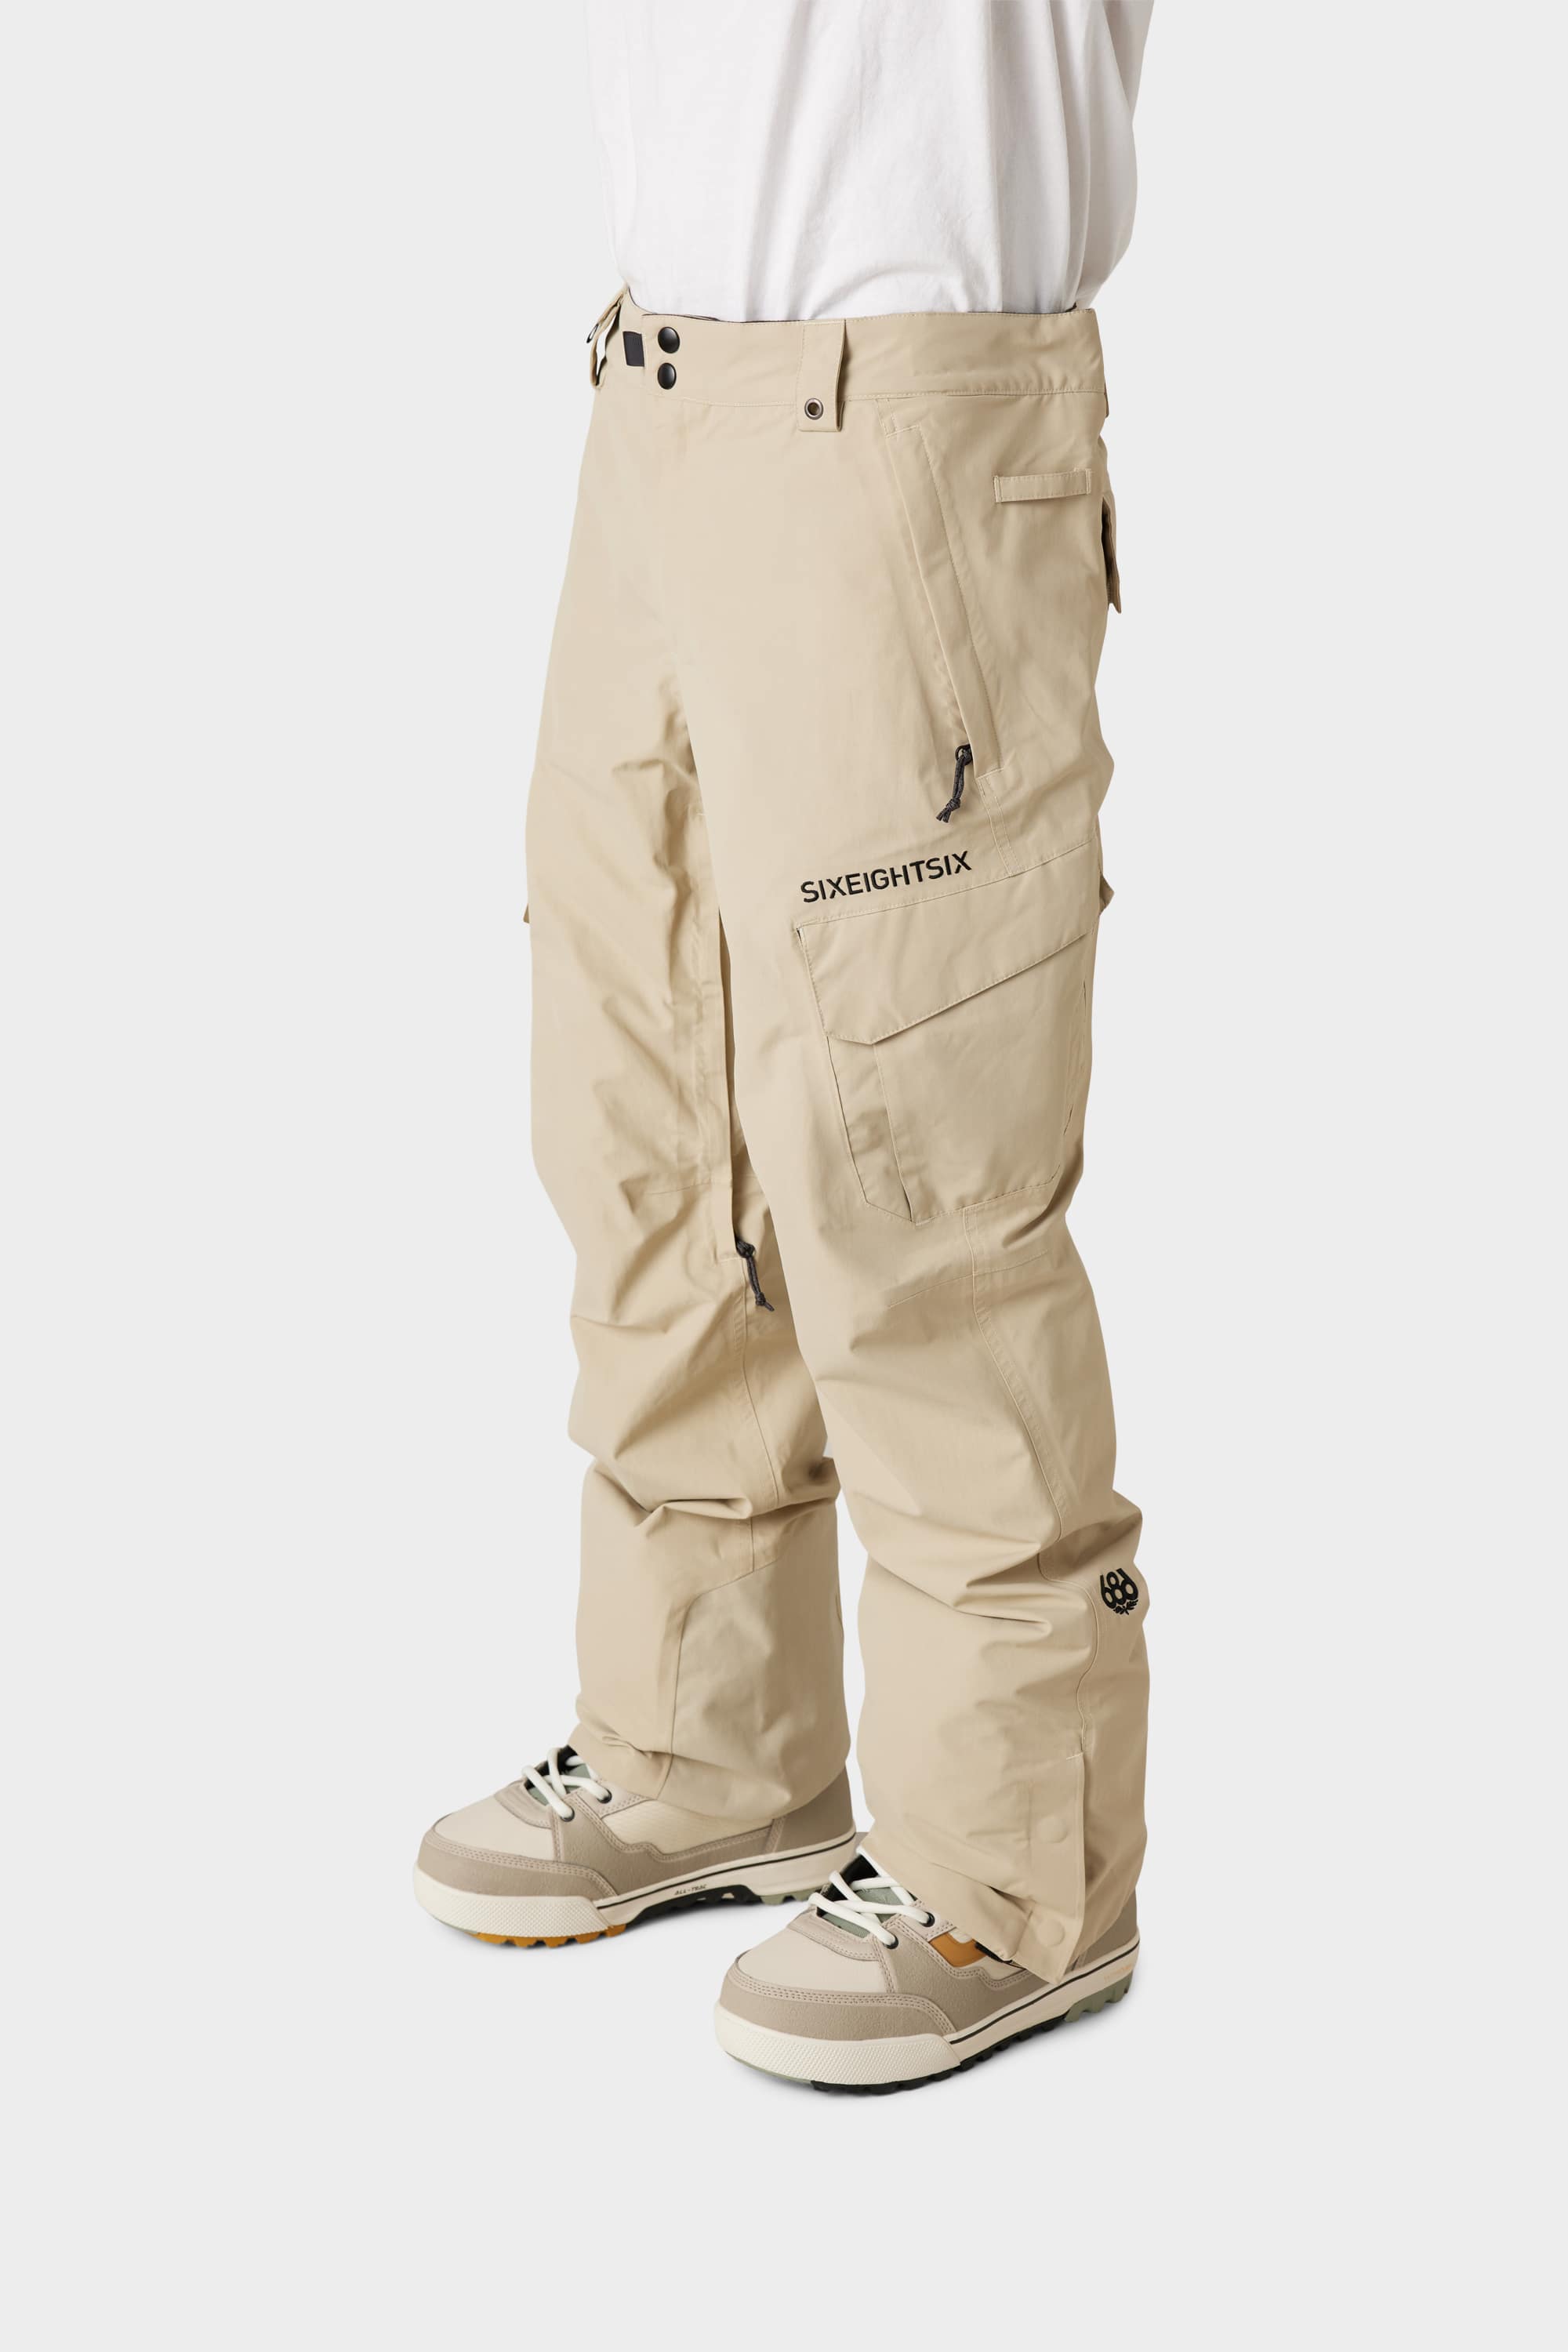 686 Women's Smarty 3-in-1 Cargo Snowboard Pants Small Light Grey 2020 for  sale online